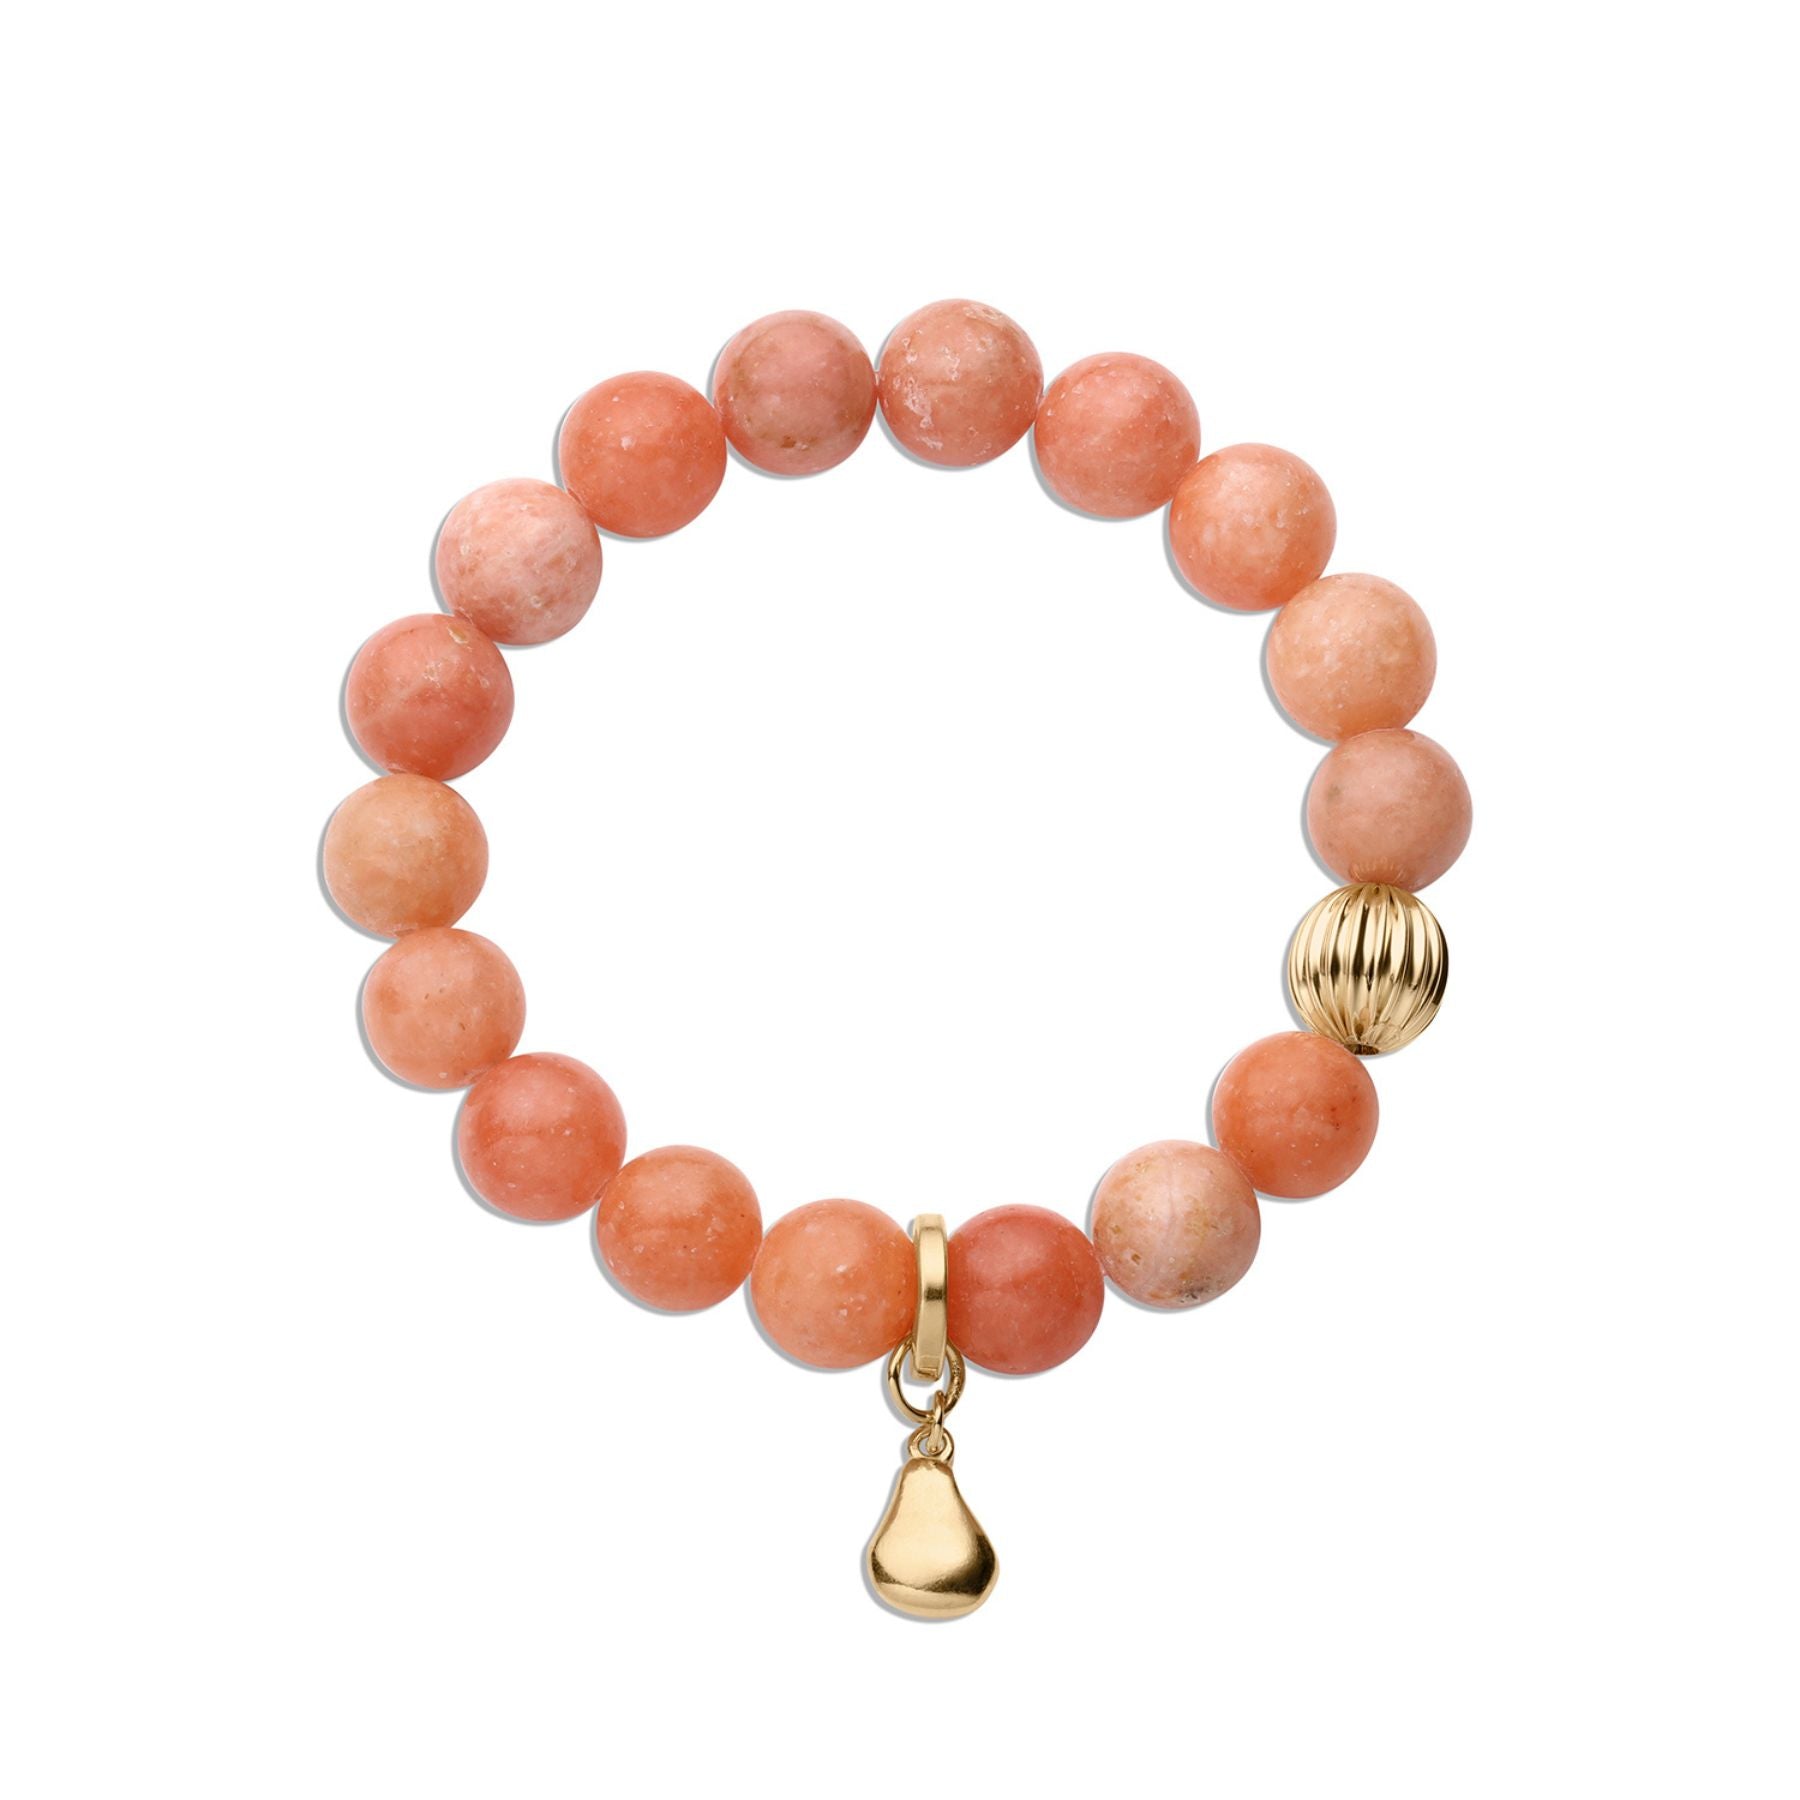 Peach calcite beaded bracelet with gold corrugated bead and pear charm.